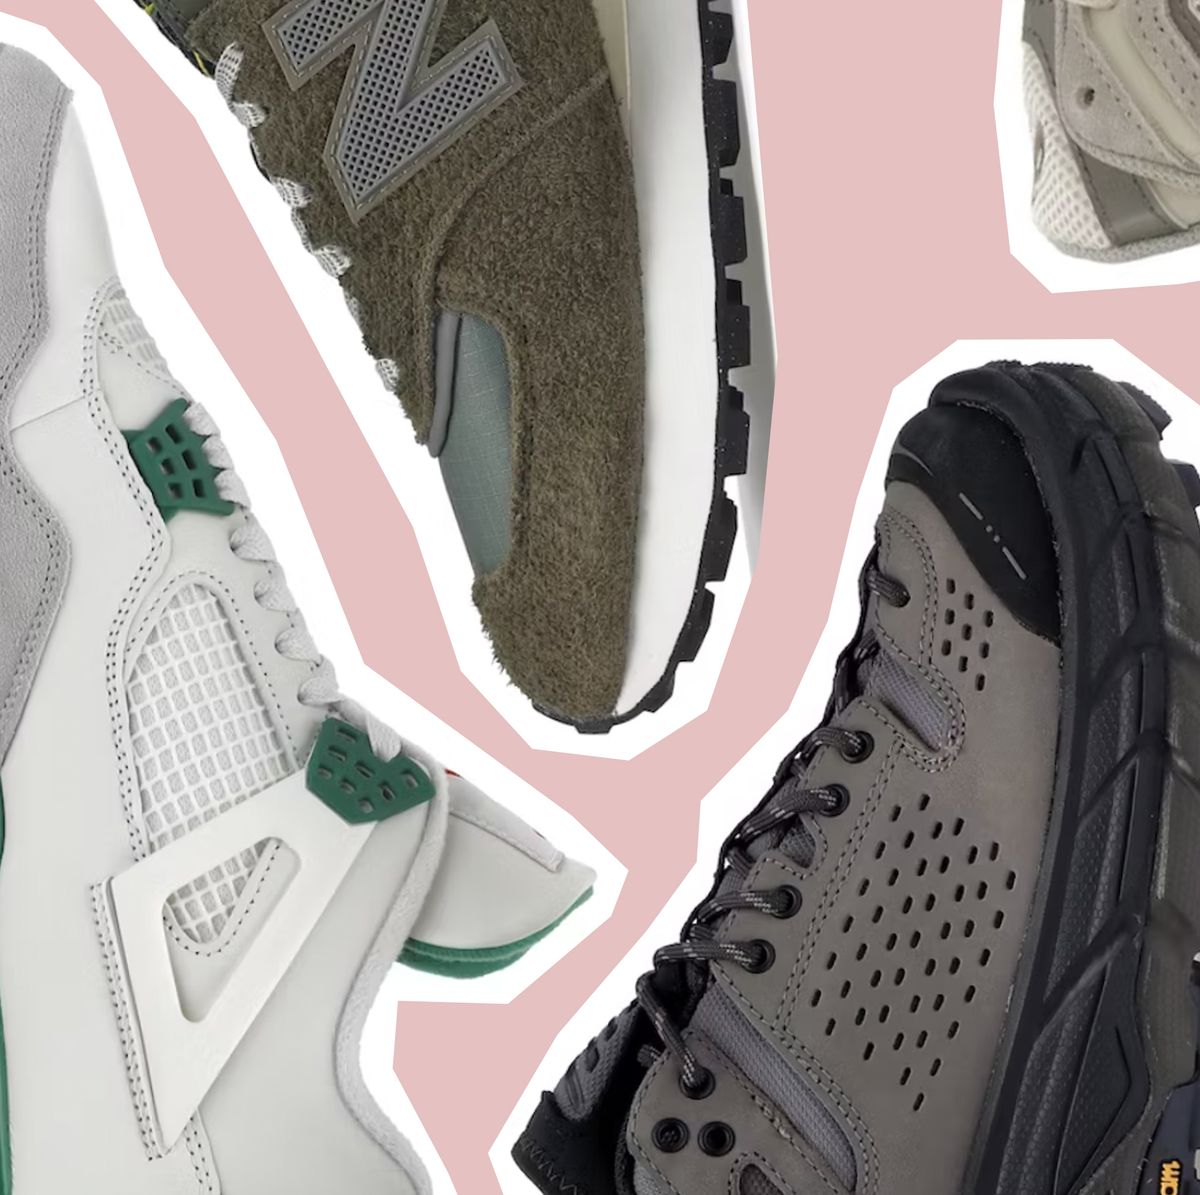 Shop 10 of the Best Green Sneakers for 2023 Here